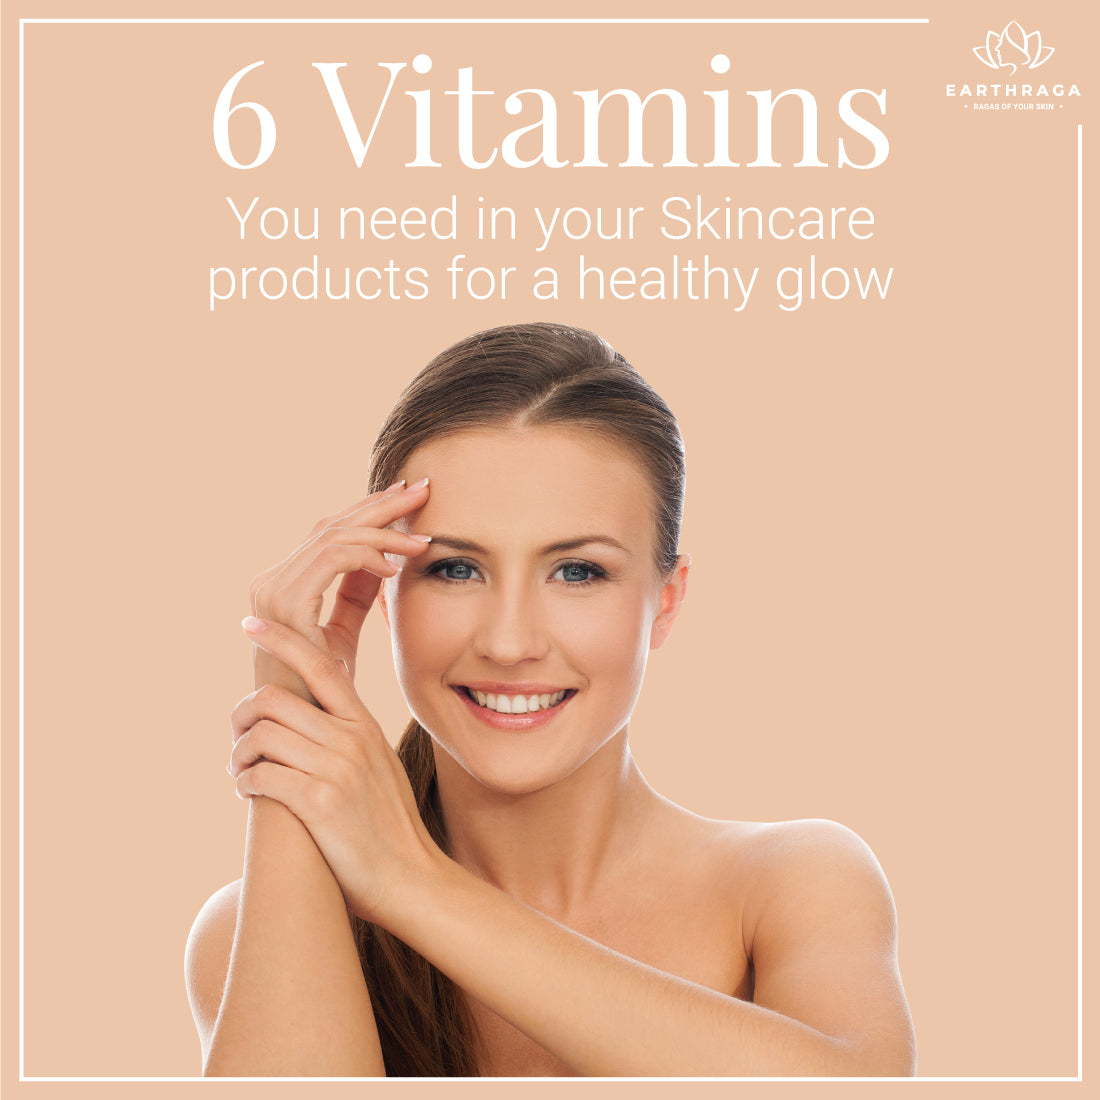 6 Vitamins You Need in Your Skincare Products for a Healthy Glow